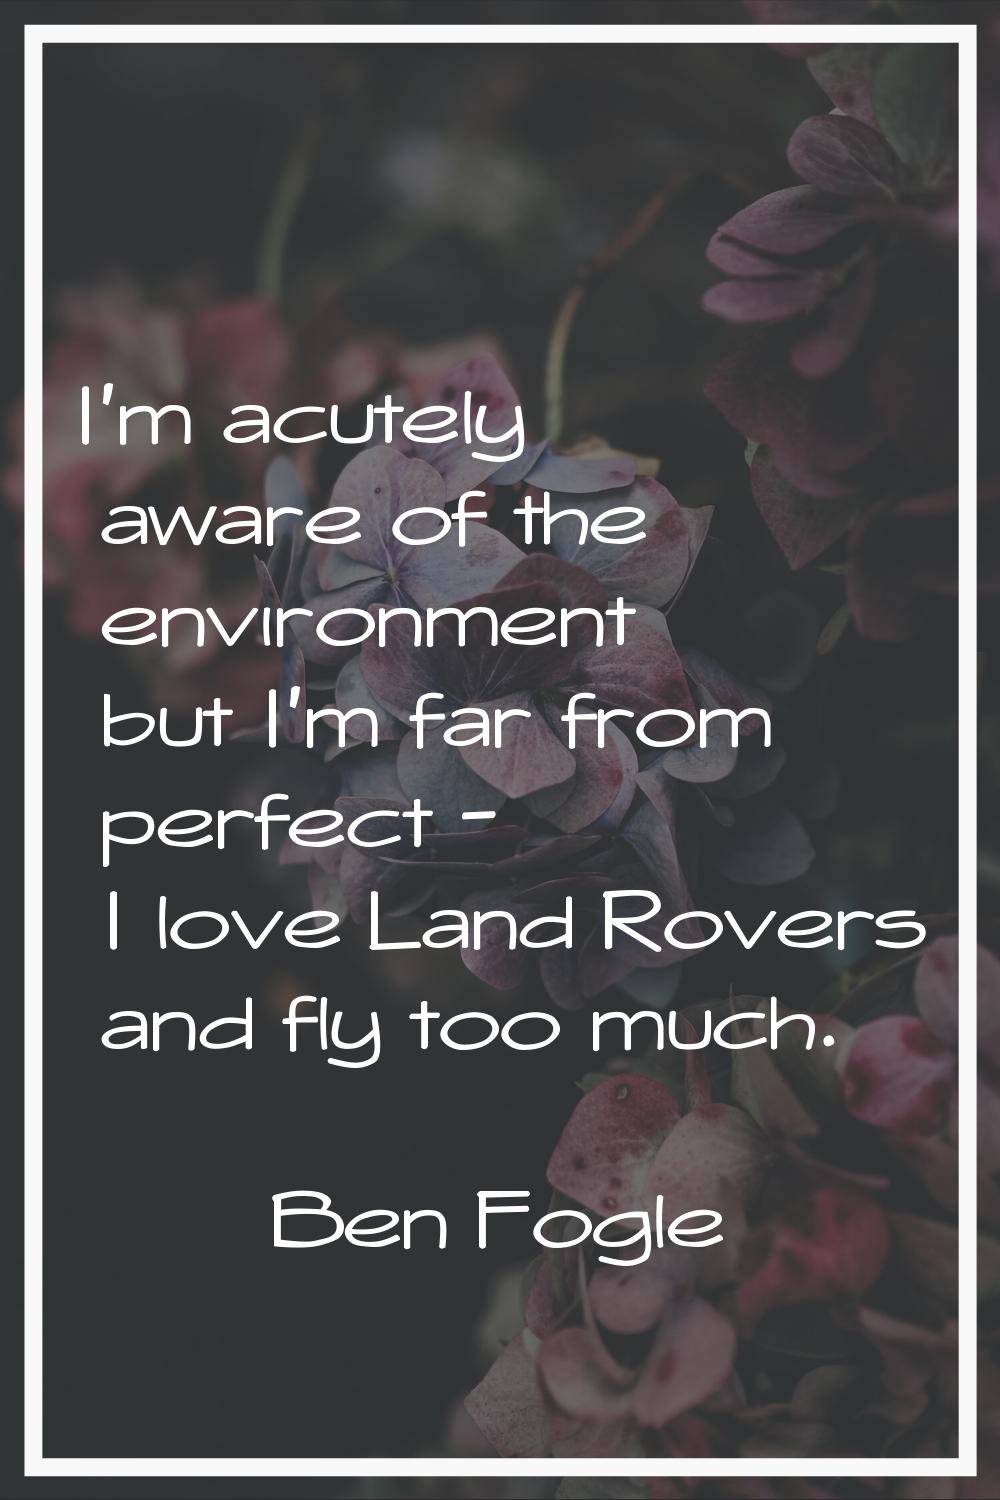 I'm acutely aware of the environment but I'm far from perfect - I love Land Rovers and fly too much